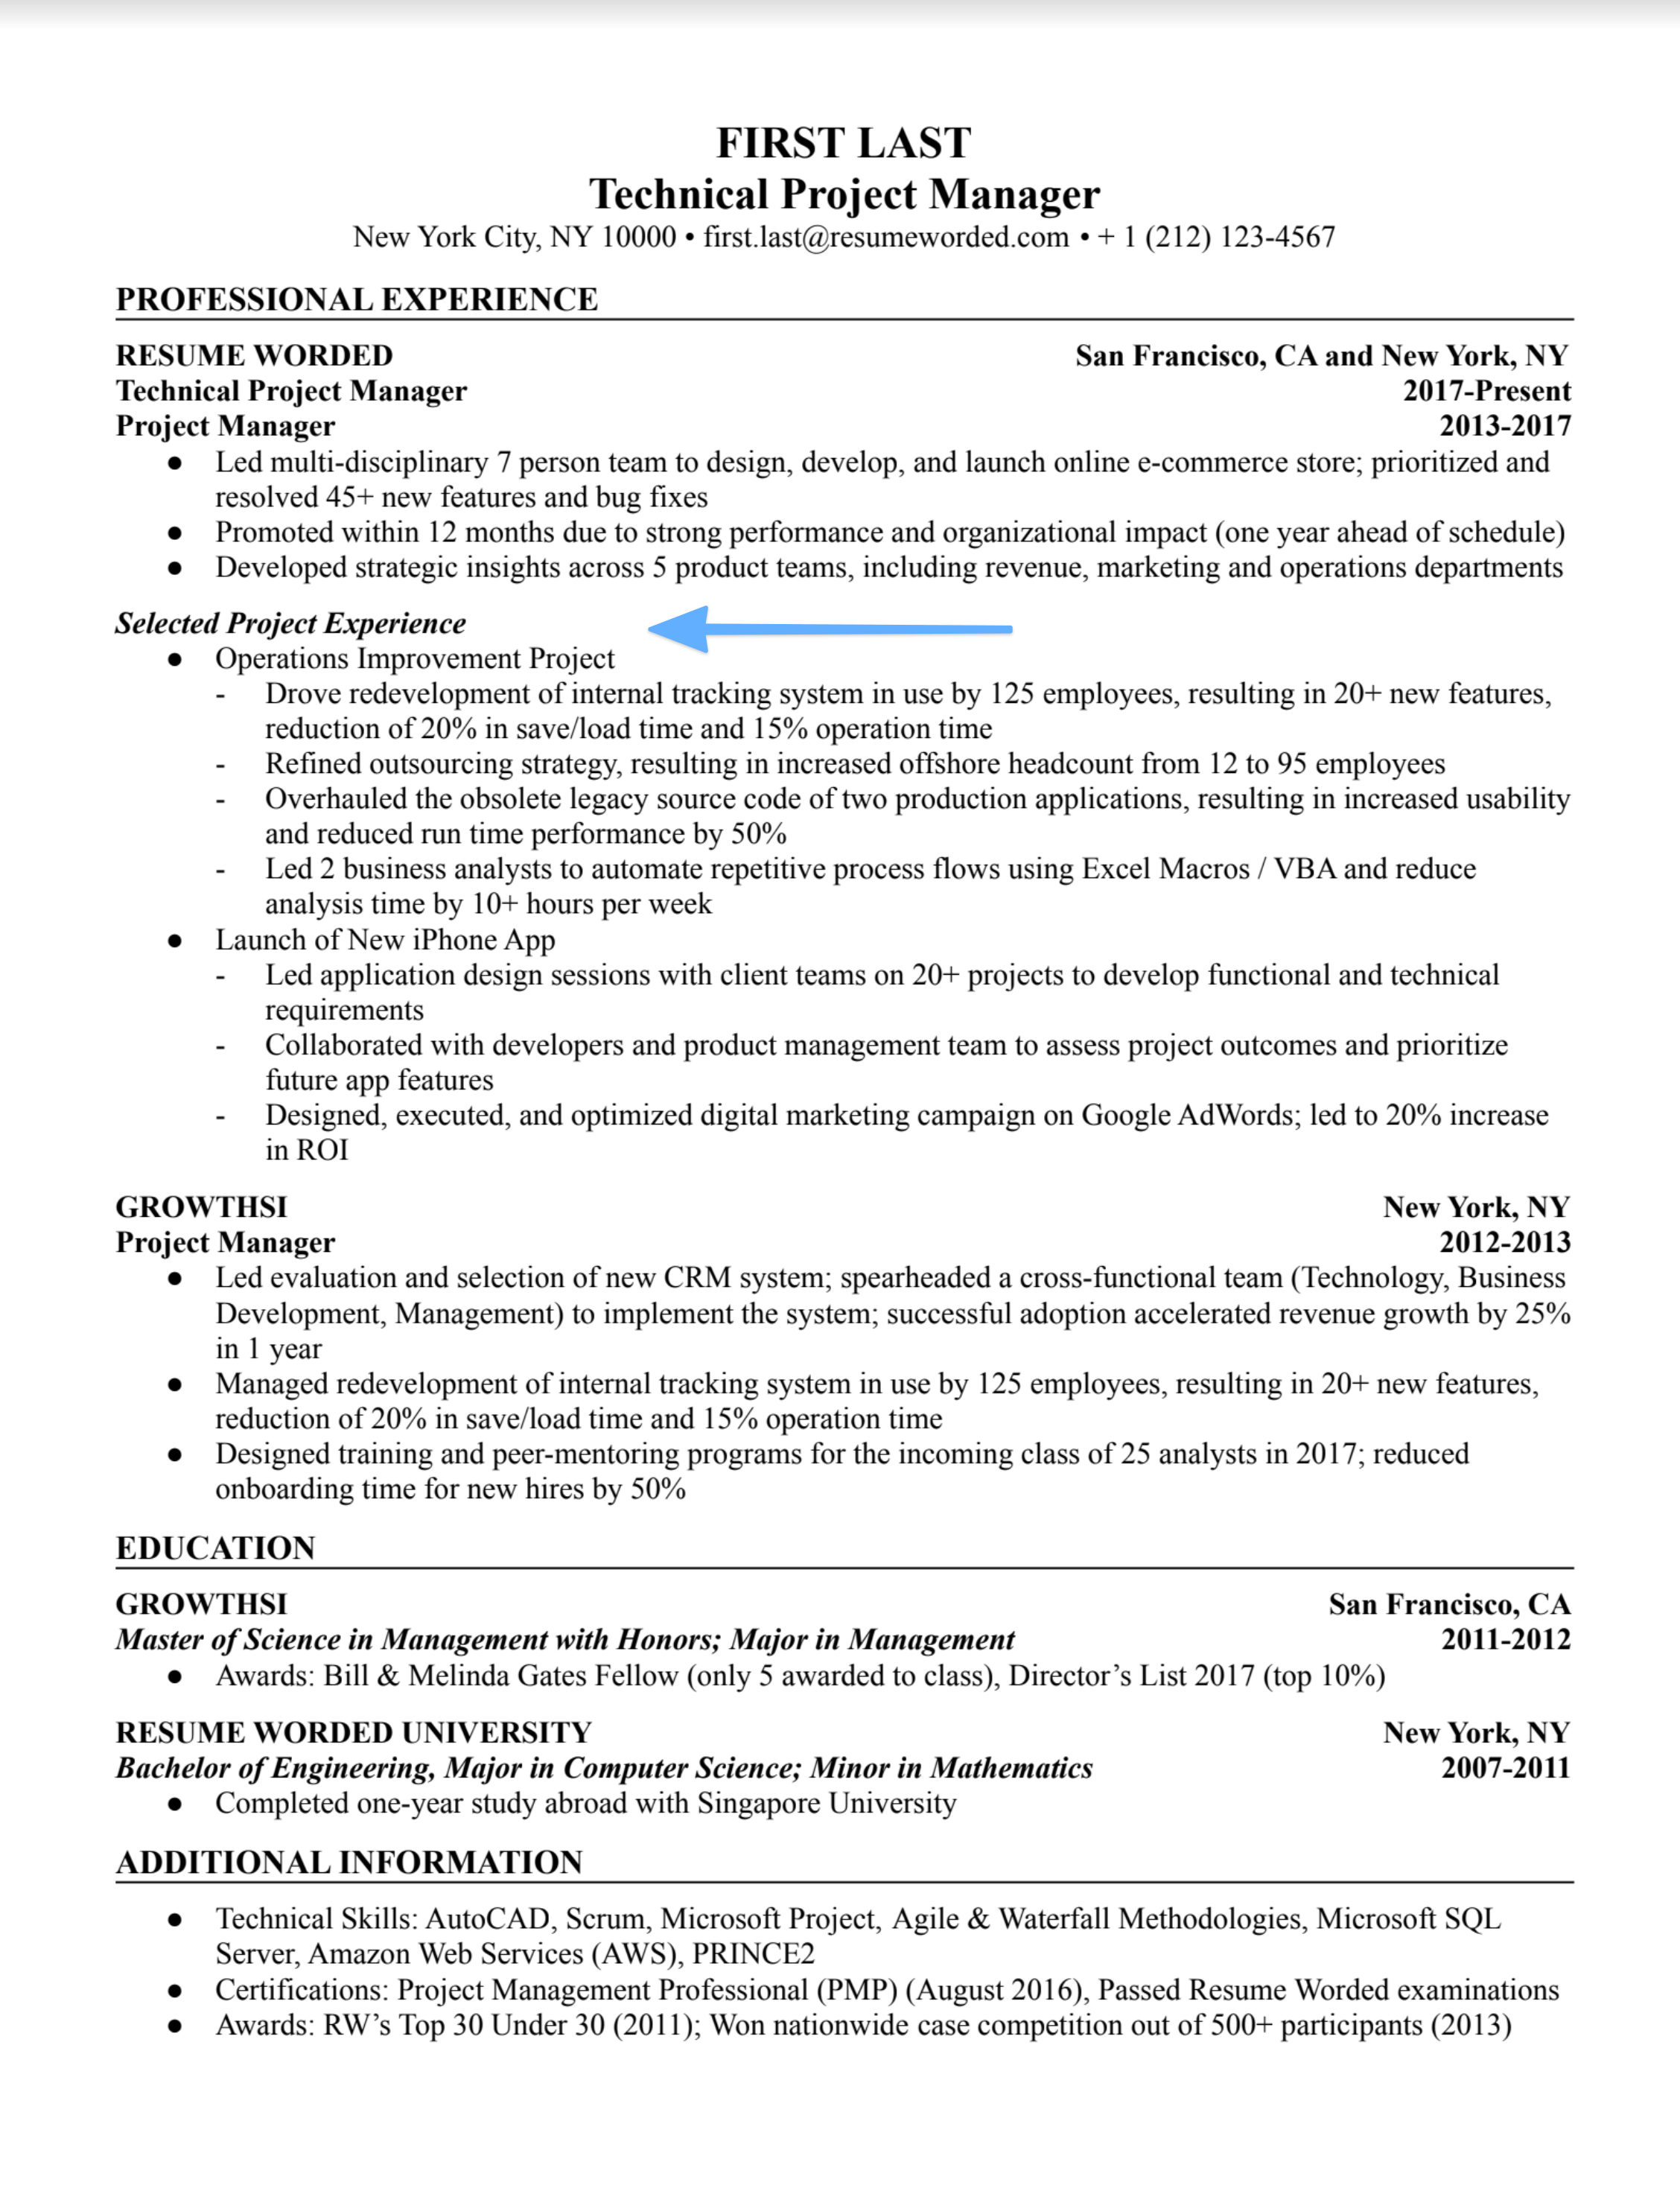 Technical Project Manager Resume Example for 2022  Resume Worded